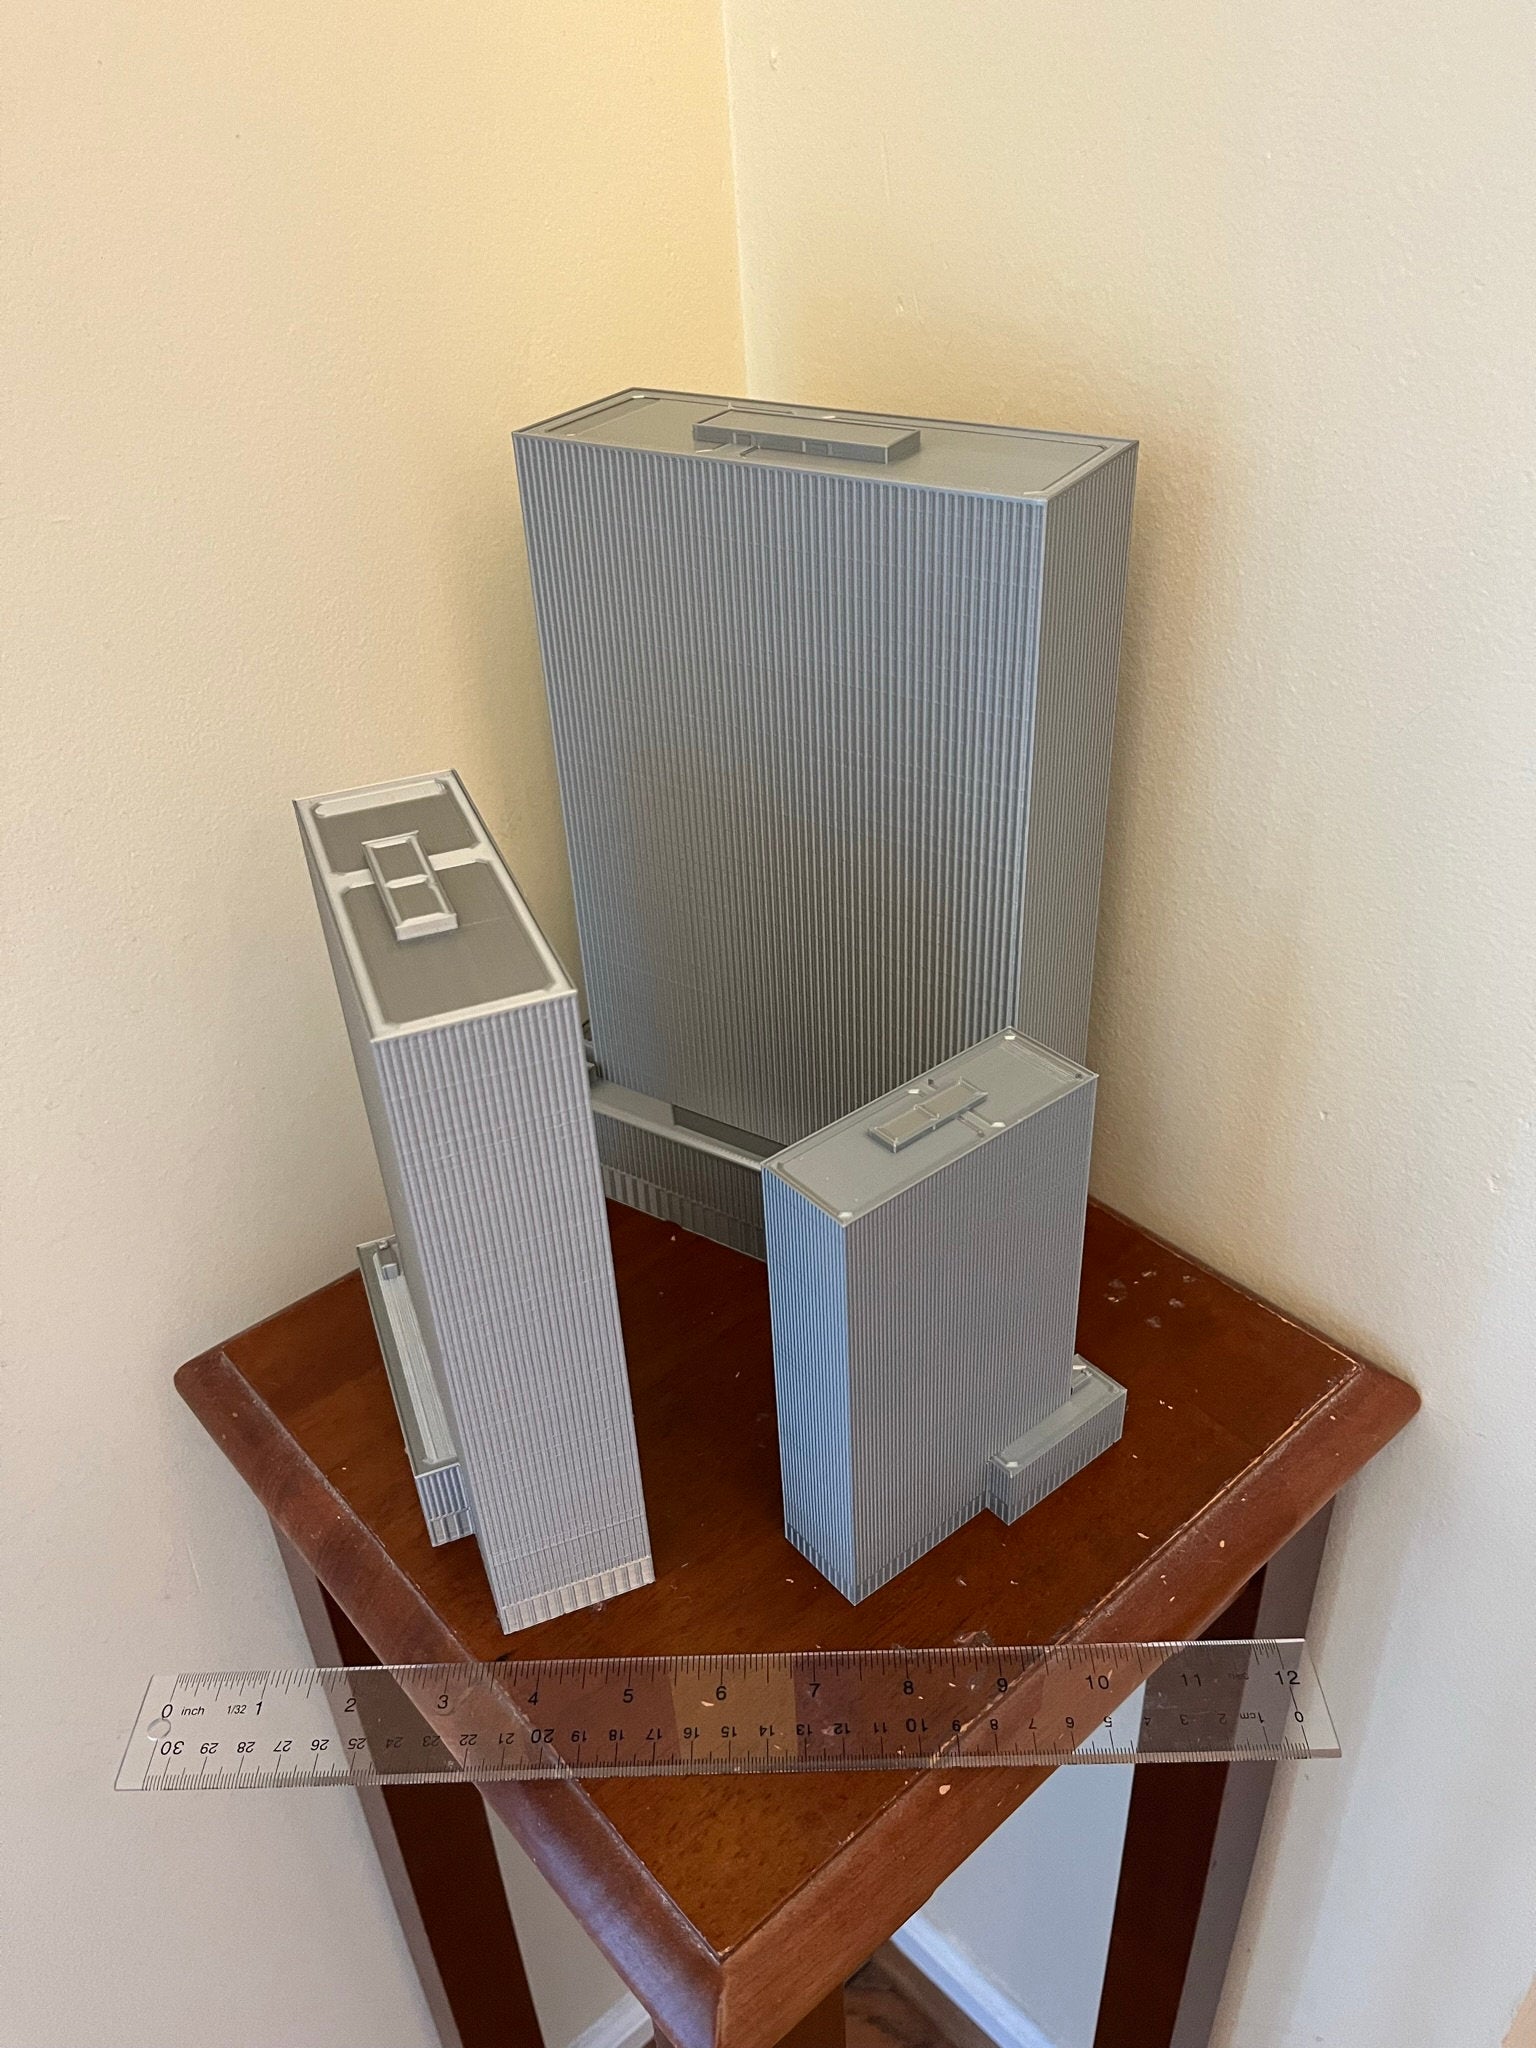 1221 Avenue of the Americas Model- 3D Printed